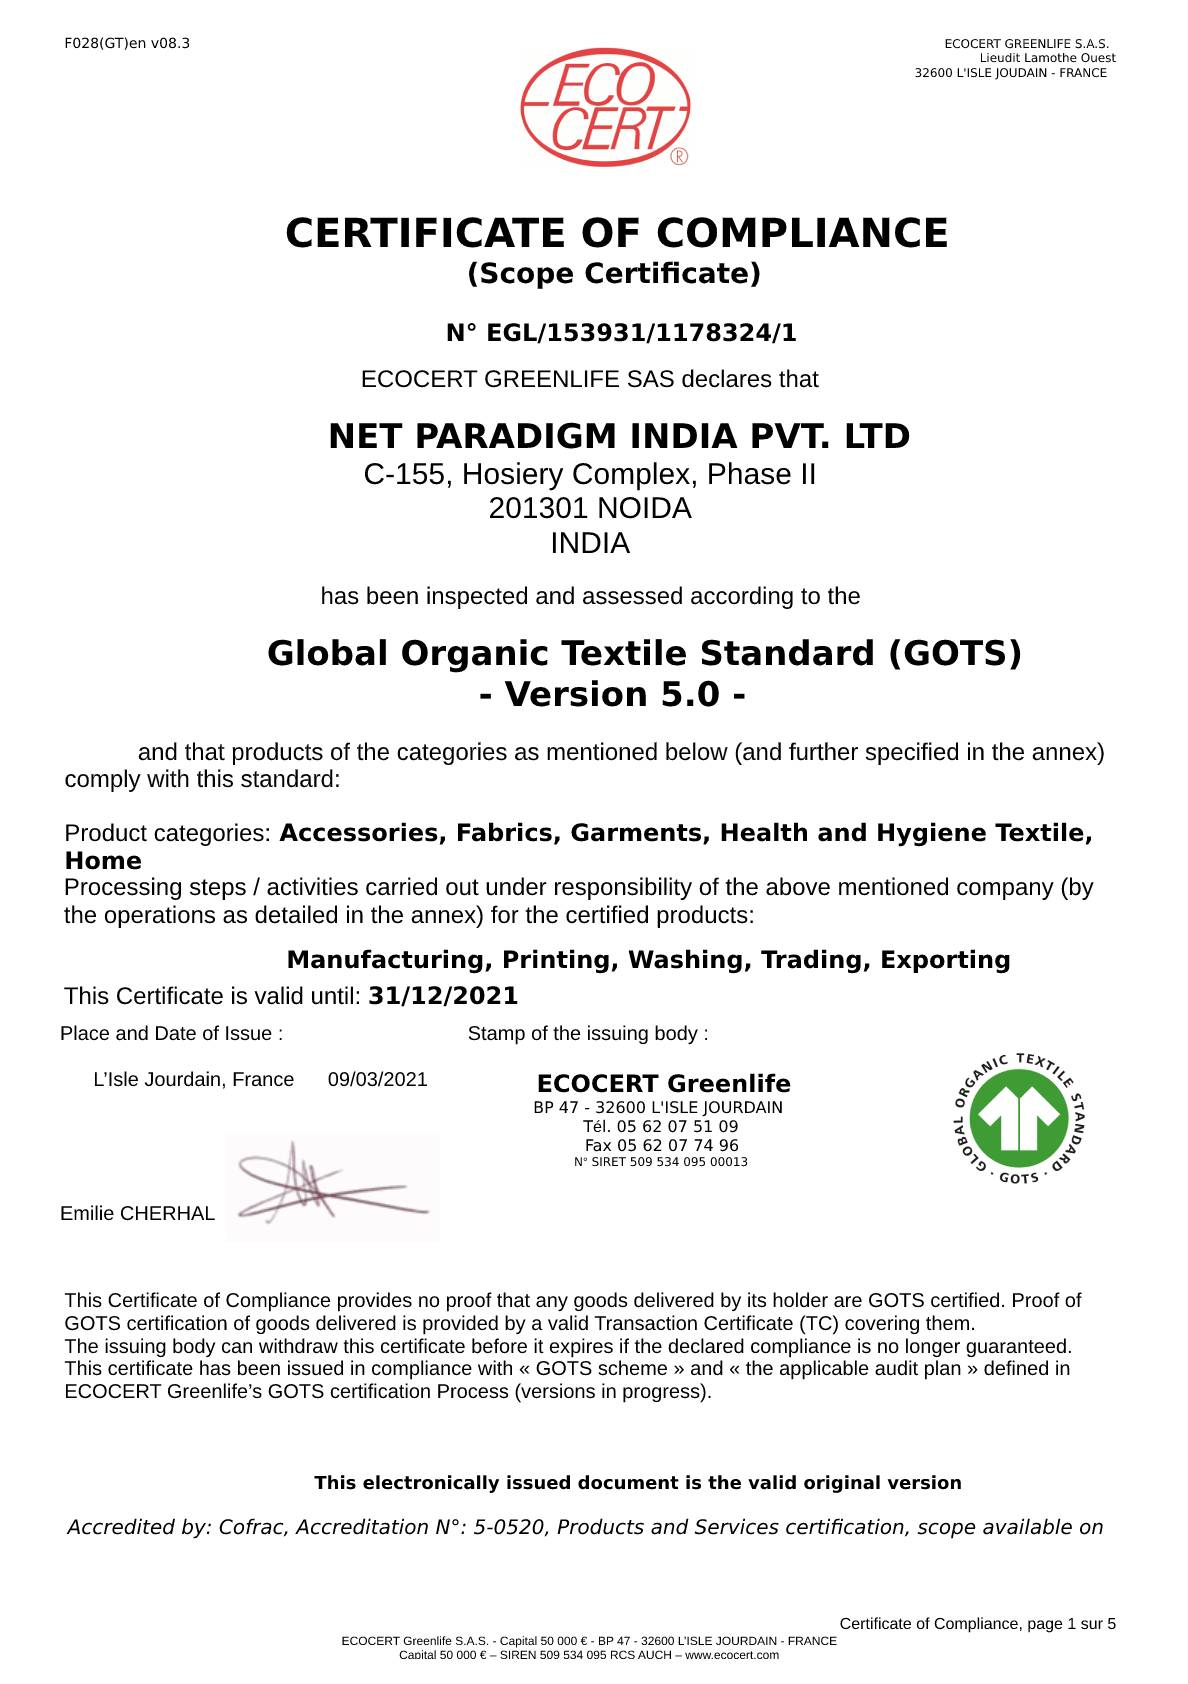 Gots Certified Apparel Factory In India  Gots Certified Clothing, Garment  Manufacturers In India